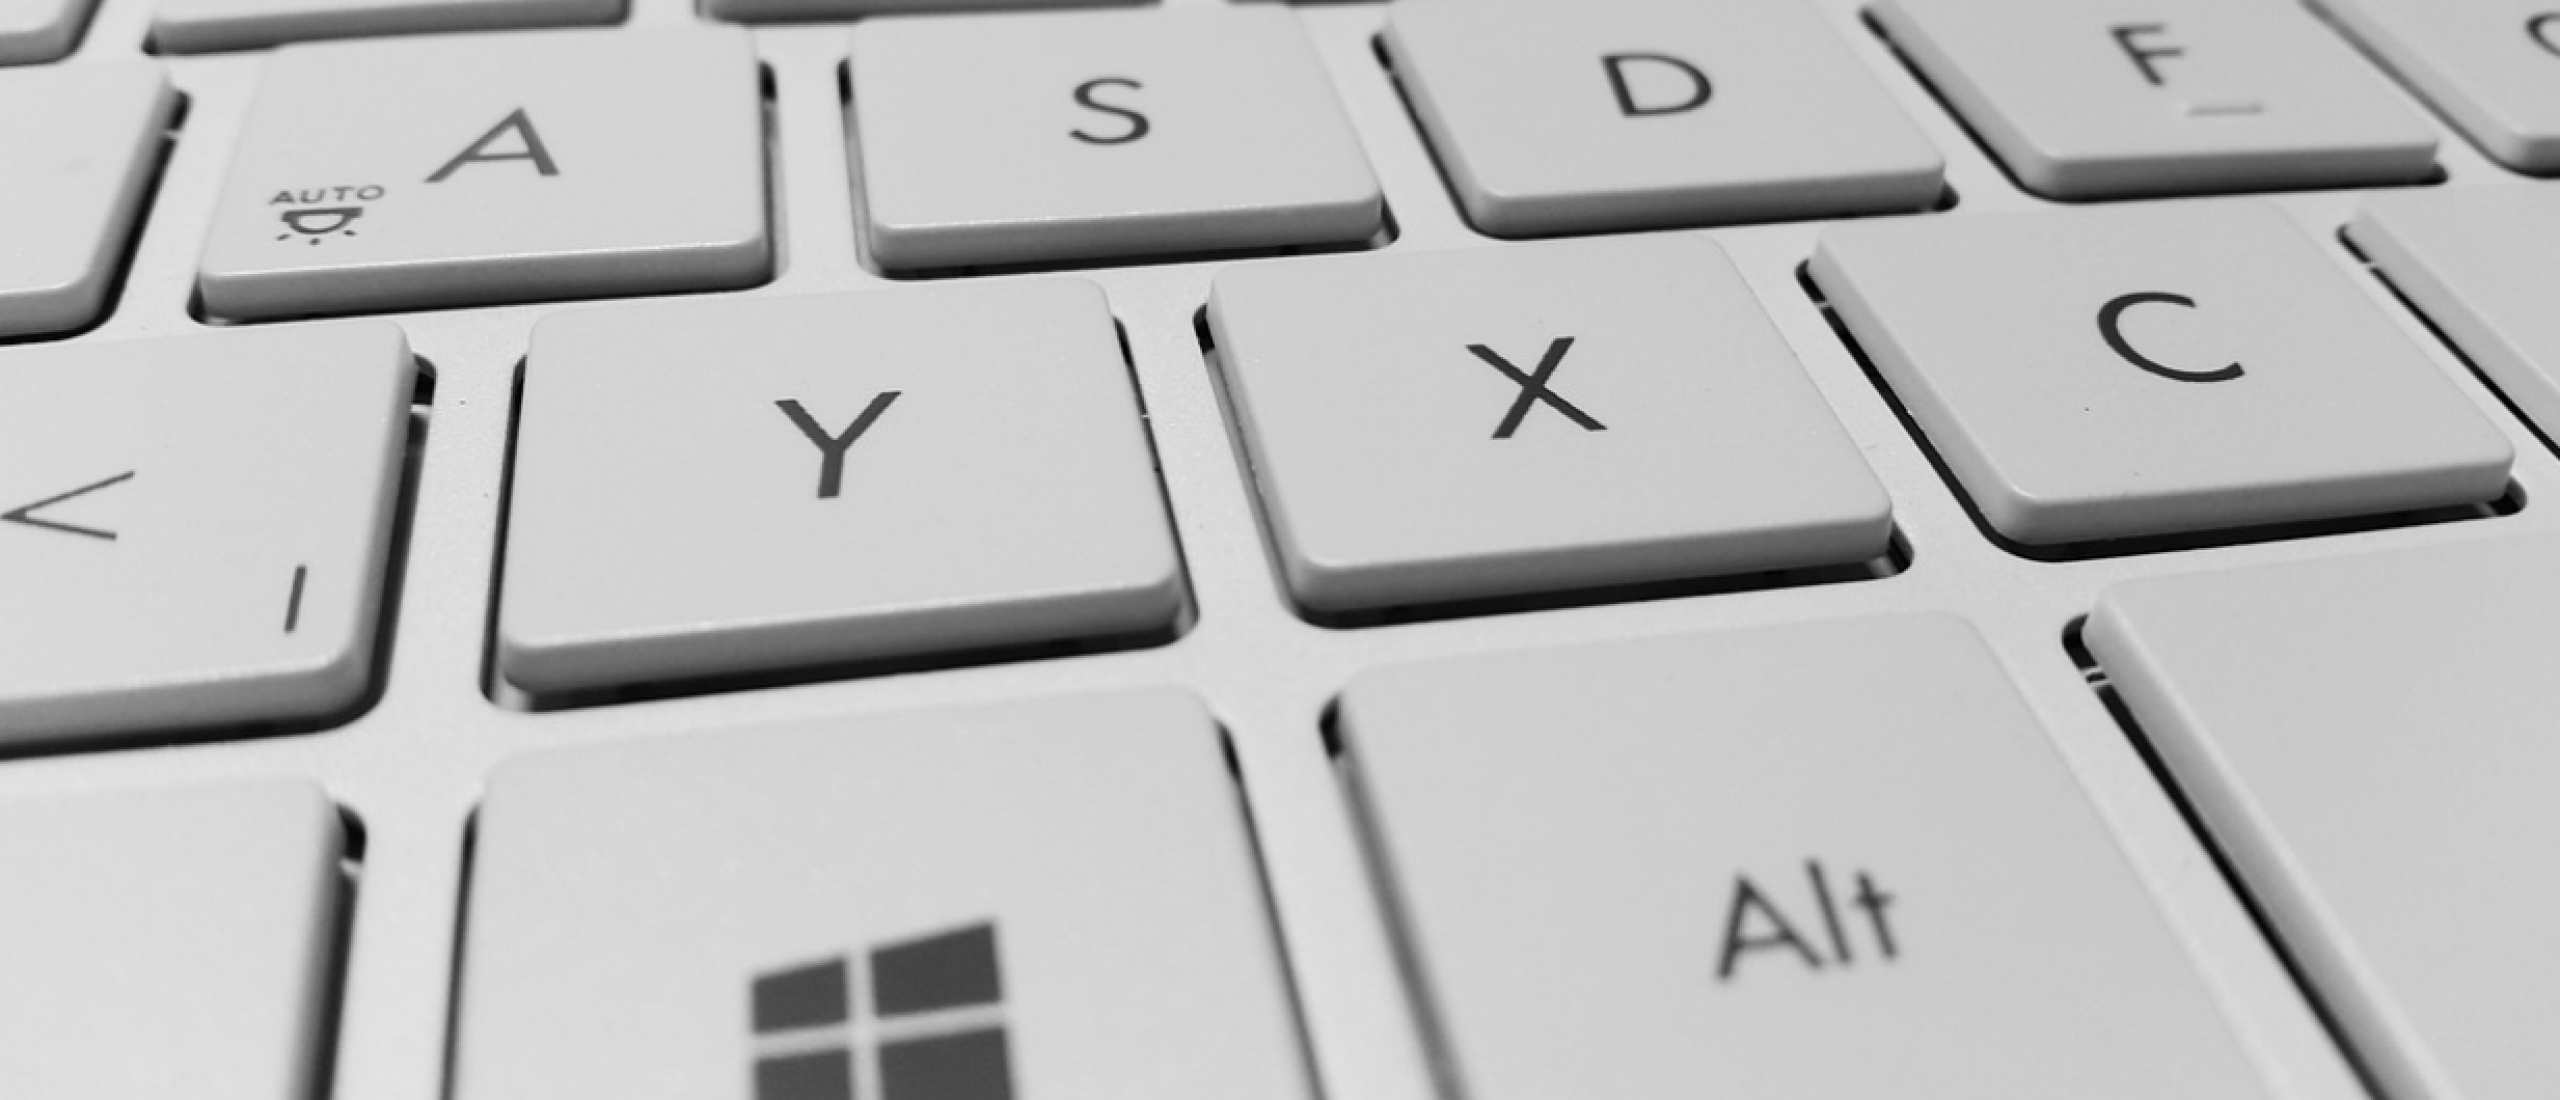 KMS Key management service for Microsoft